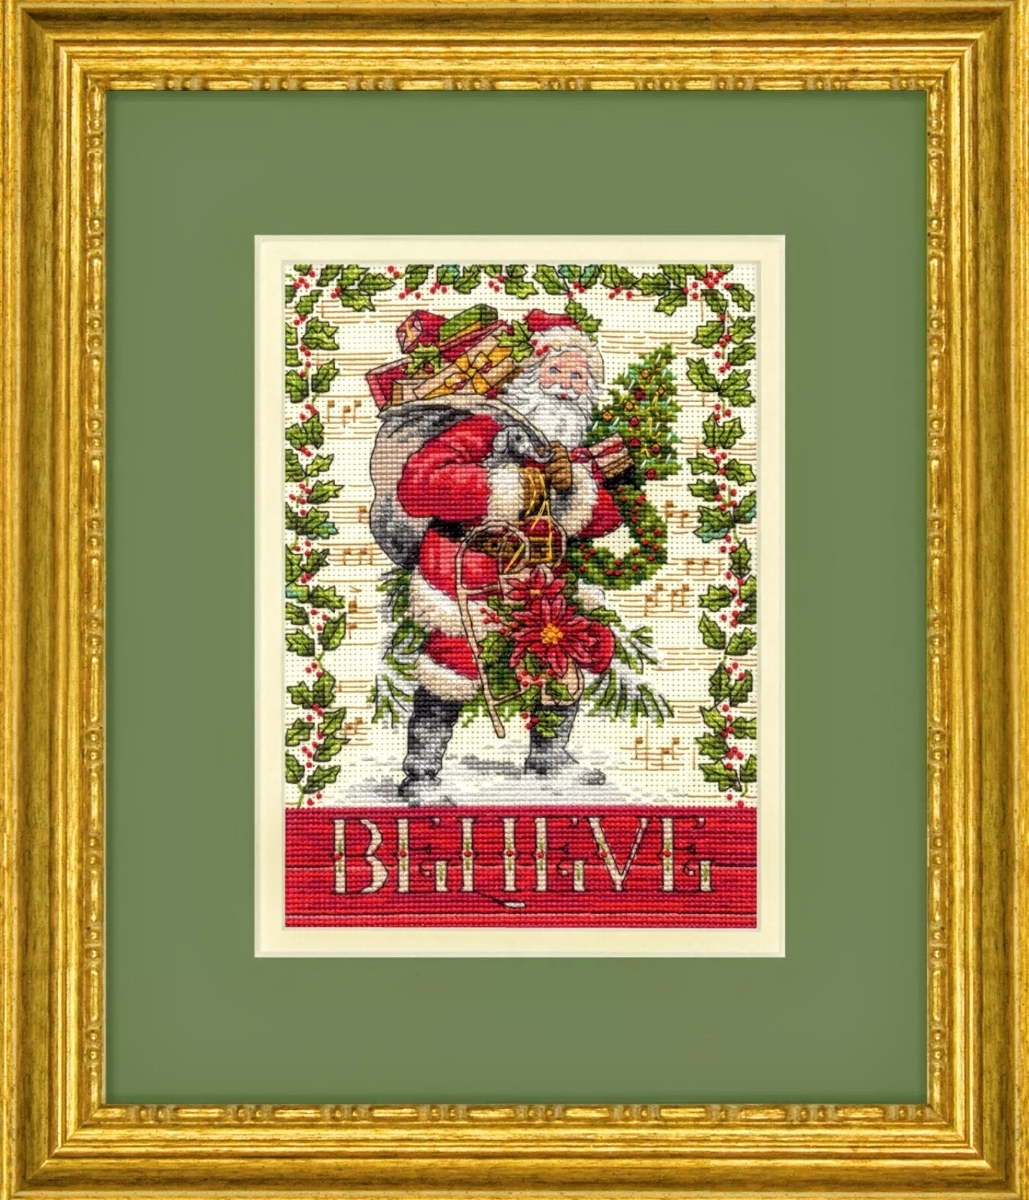 Dimensions クロスステッチキット■サンタクロース Believe in Santa クリスマス アメリカ 直輸入刺繍キット